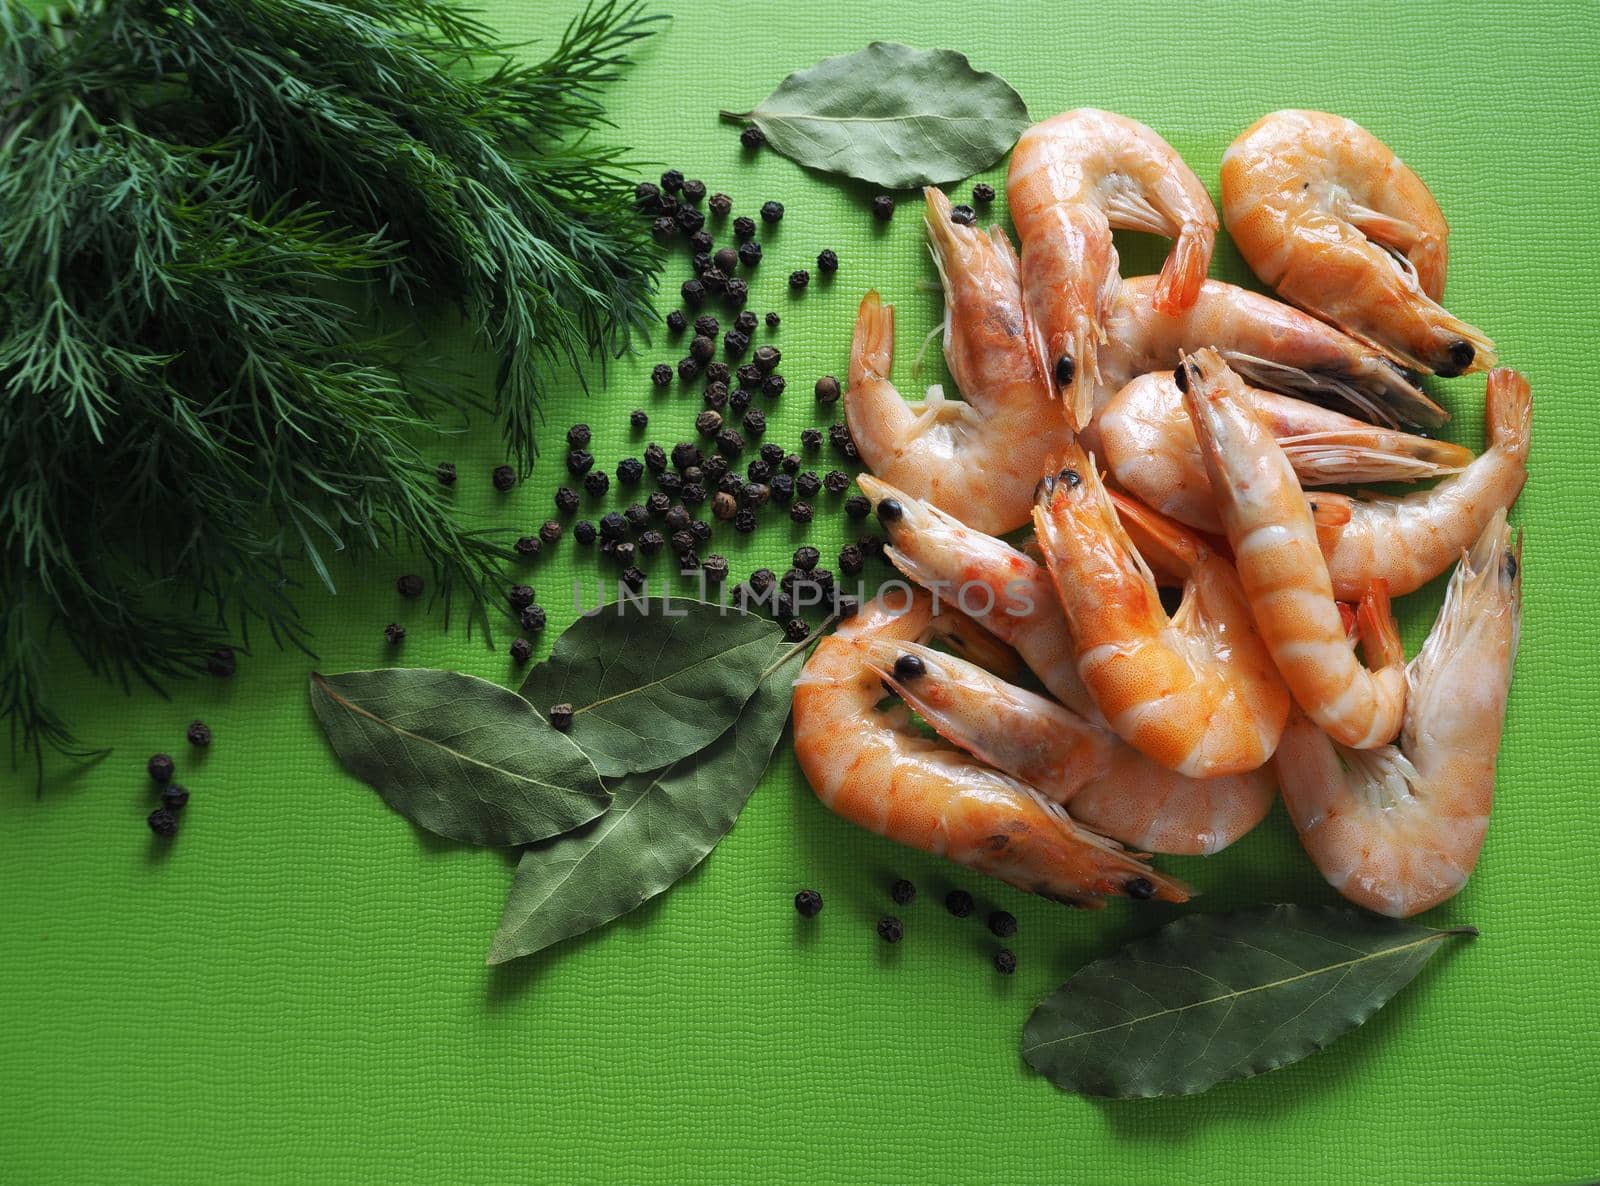 Prawns are royal with herbs and spices. by Olga26